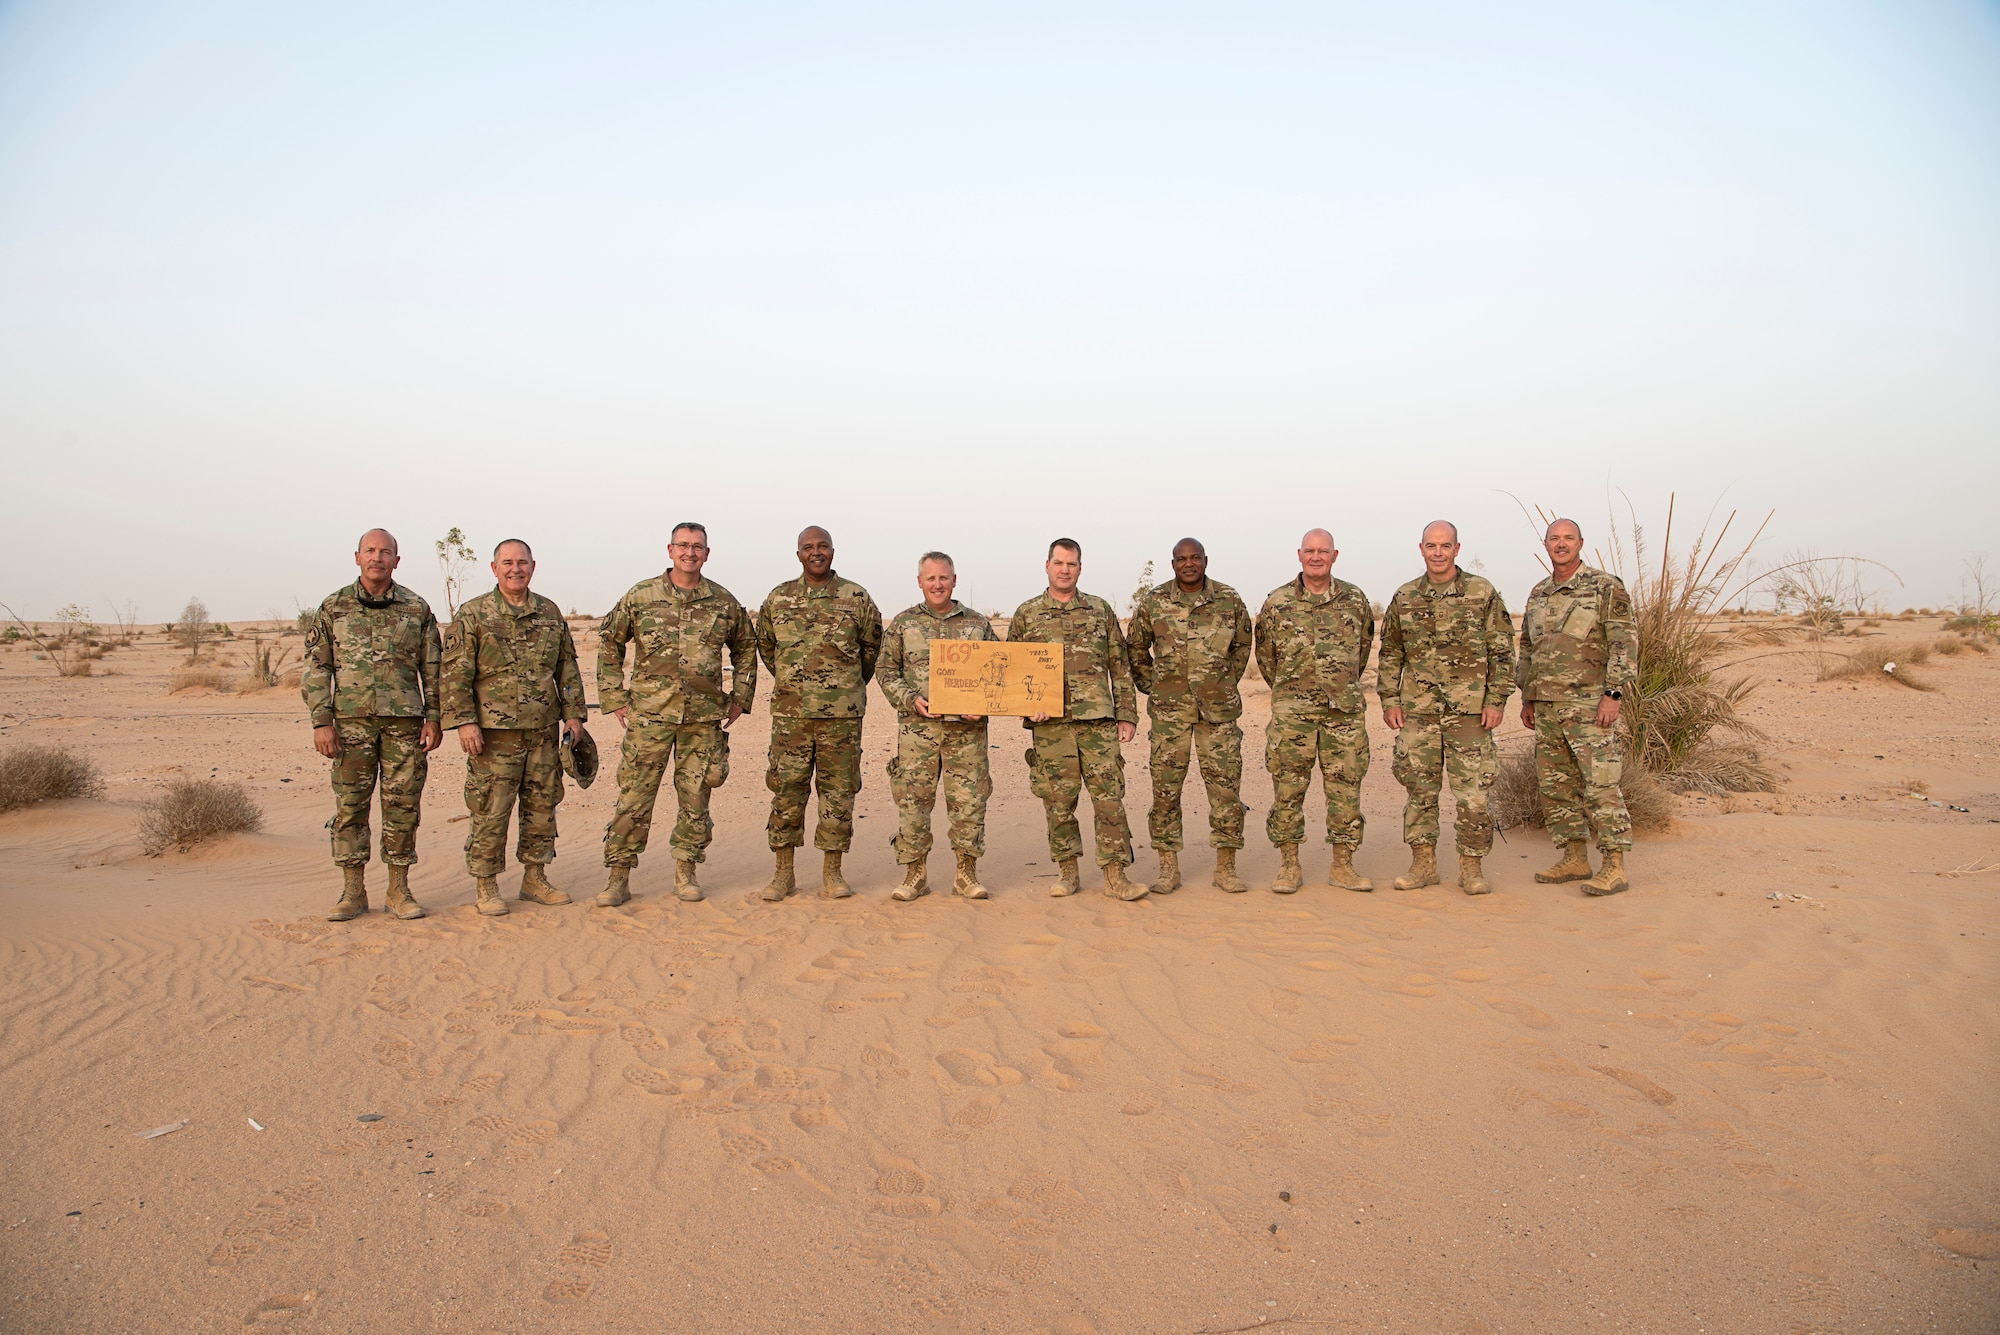 U.S. Air Force Airmen from the 157th Expeditionary Fighter Generation Squadron pose for a picture at the site of the life support area used by coalition forces during Operation DESERT STORM in 1991 at Prince Sultan Air Base, Kingdom of Saudi Arabia, June 16, 2021. From left: Chief Master Sgt. Anthony Terry, Senior Master Sgt. Mark Tanner, Chief Master Sgt. Charles Bowen, Master Sgt. Charles Randle, Senior Master Sgt. Charles Talbert, Senior Master Sgt. Martin Gladden, Master Sgt. Robert Woodard, Senior Master Sgt. Burman Jones, Senior Master Sgt. Jeffrey Orr, Senior Master Sgt. Michael Puck.  The "Swamp Fox" Airmen from the South Carolina Air National Guard are deployed to PSAB to project combat power and help bolster defensive capabilities against potential threats in the region. (U.S. Air National Guard photo by Senior Master Sgt. Carl Clegg)